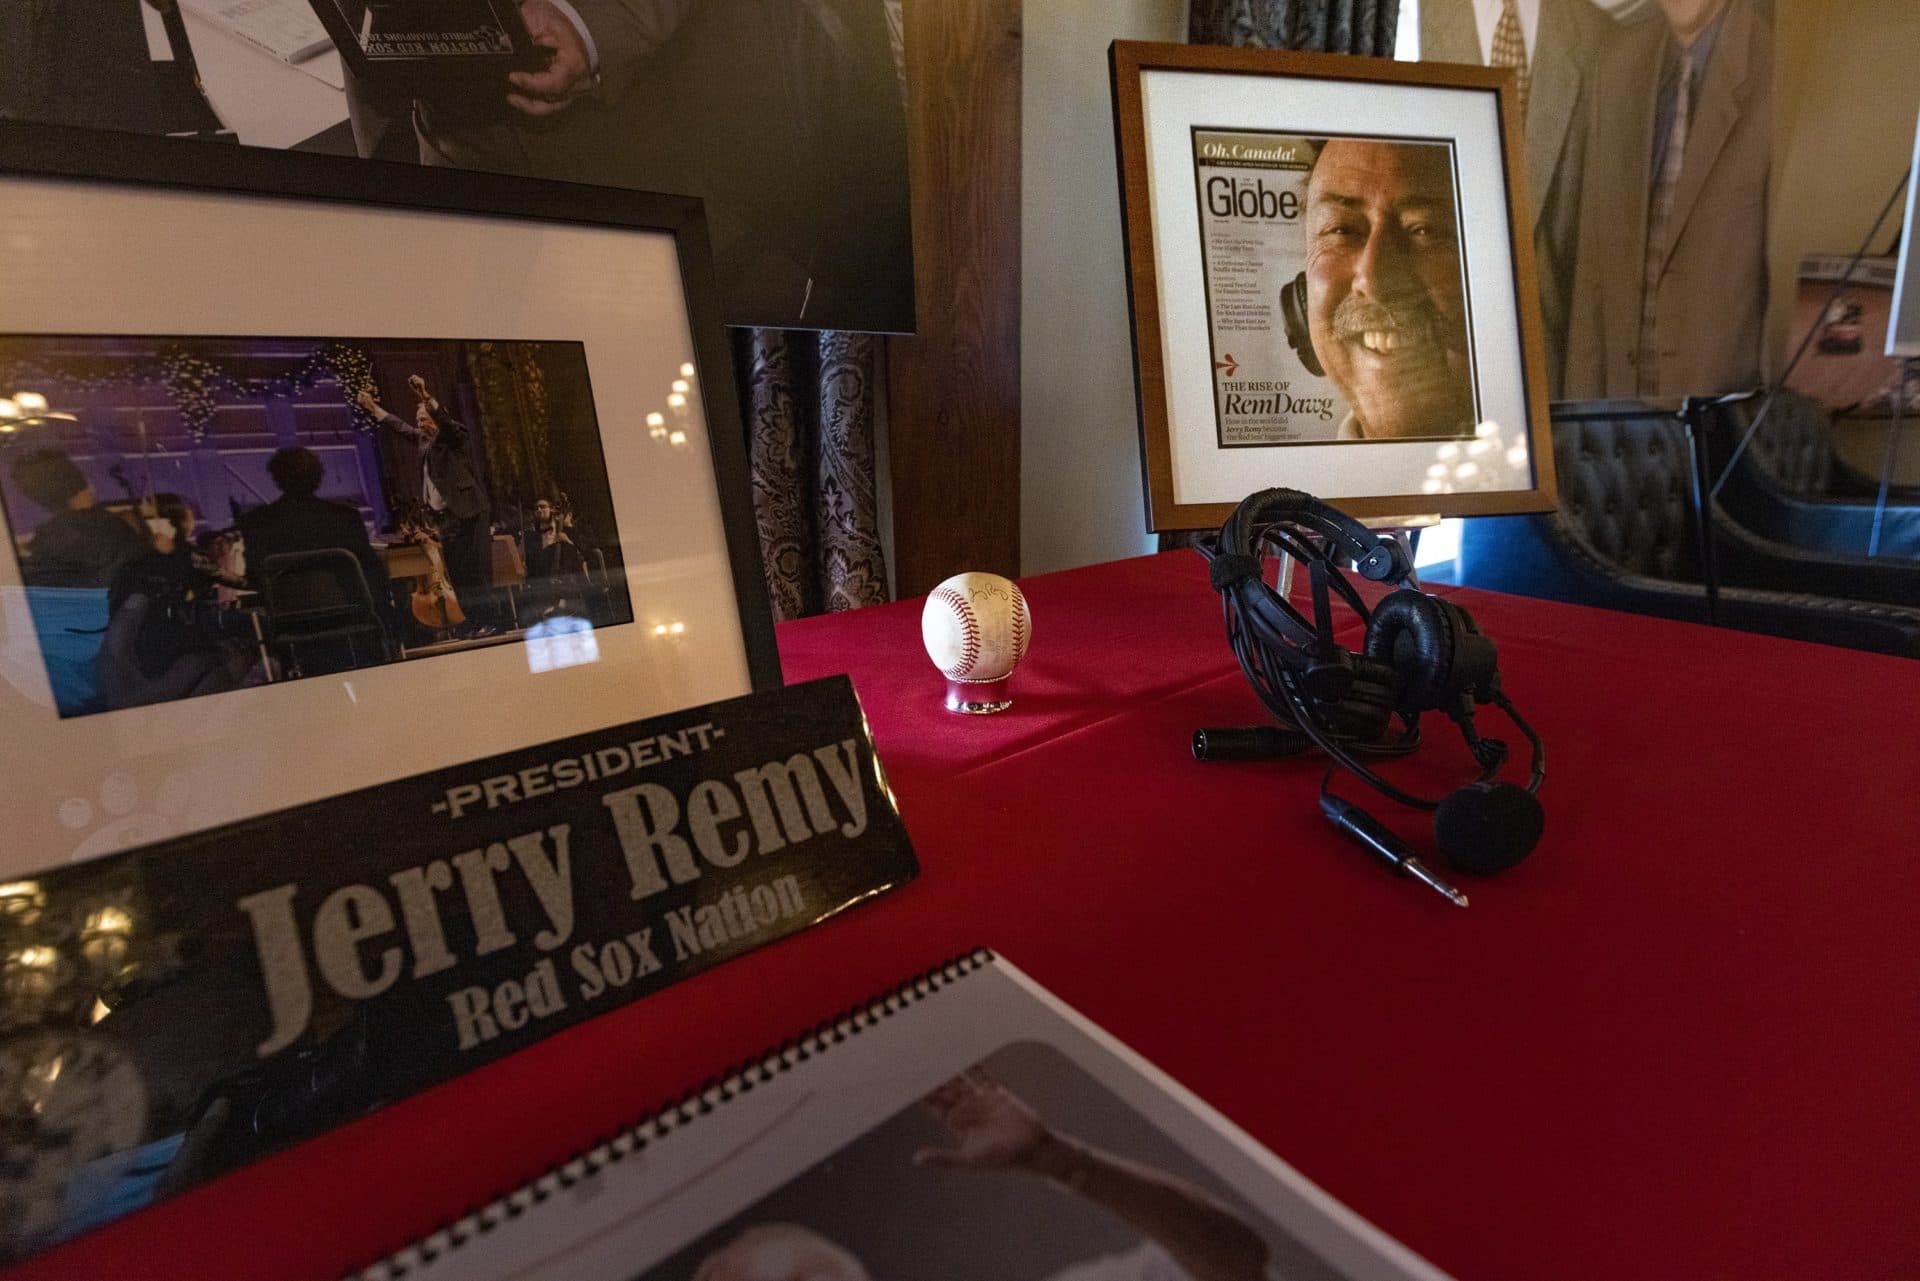 A signed baseball and a headset Remy wore while working as a broadcaster for the Red Sox were among the many items on display to memorialize him. (Jesse Costa/WBUR)